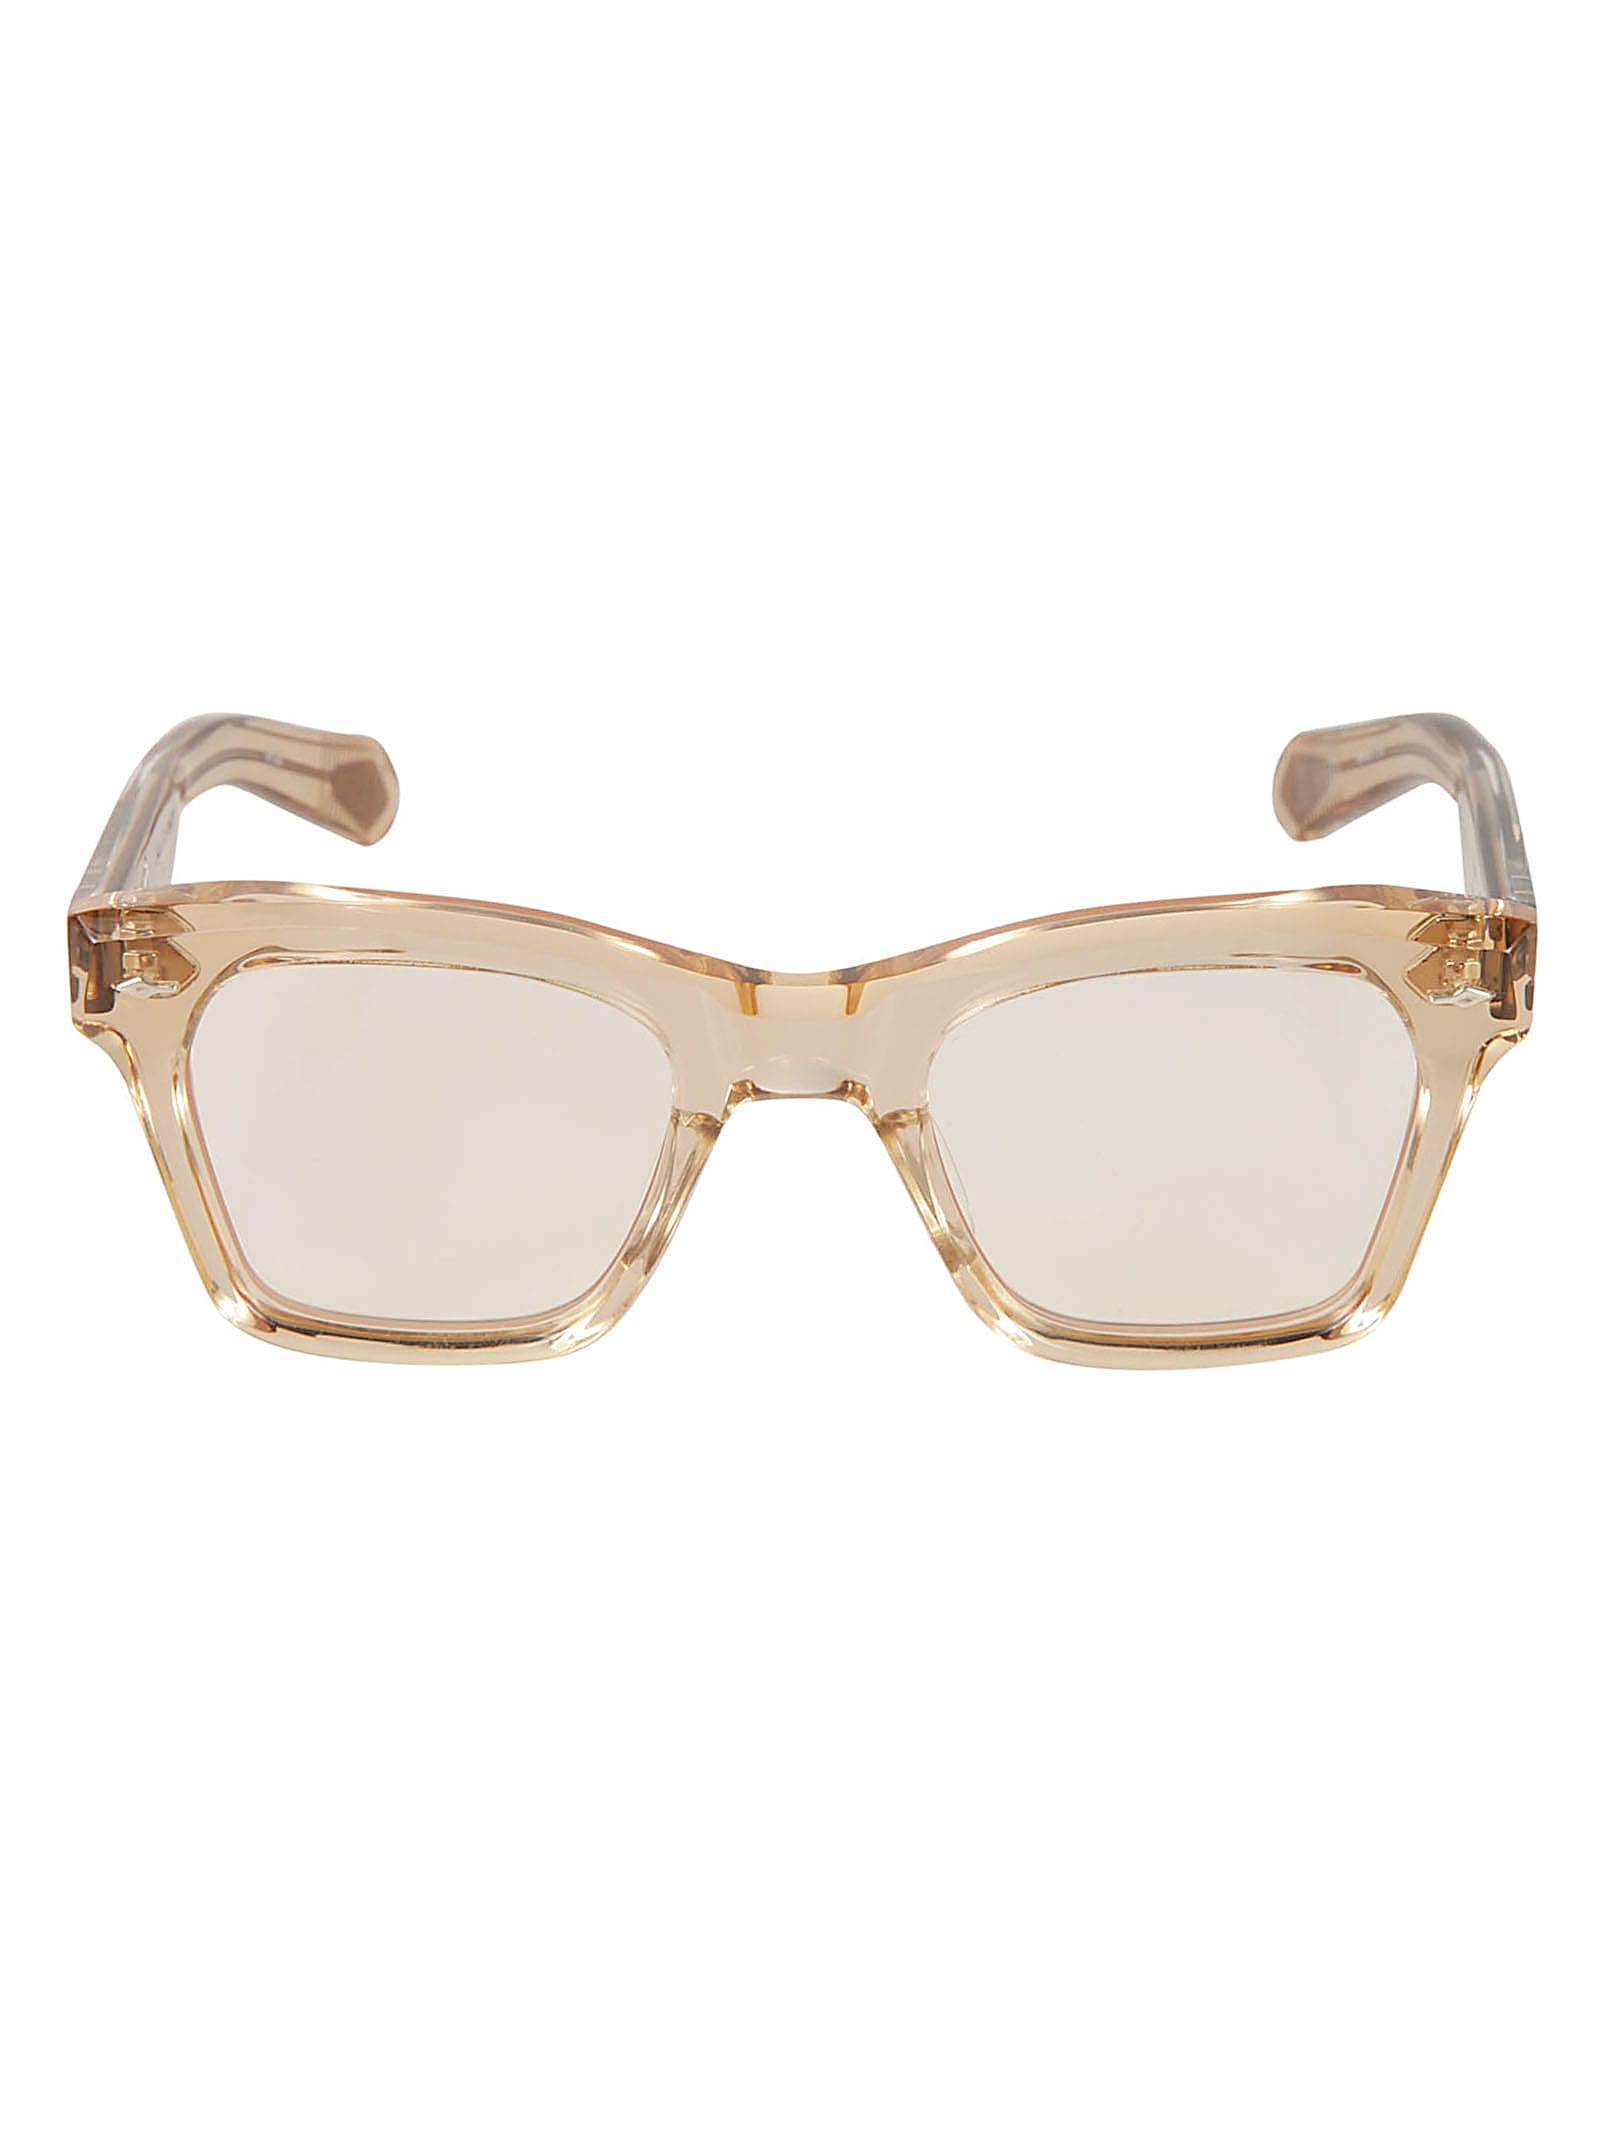 Jacques Marie Mage Picabia Frame In Neutral